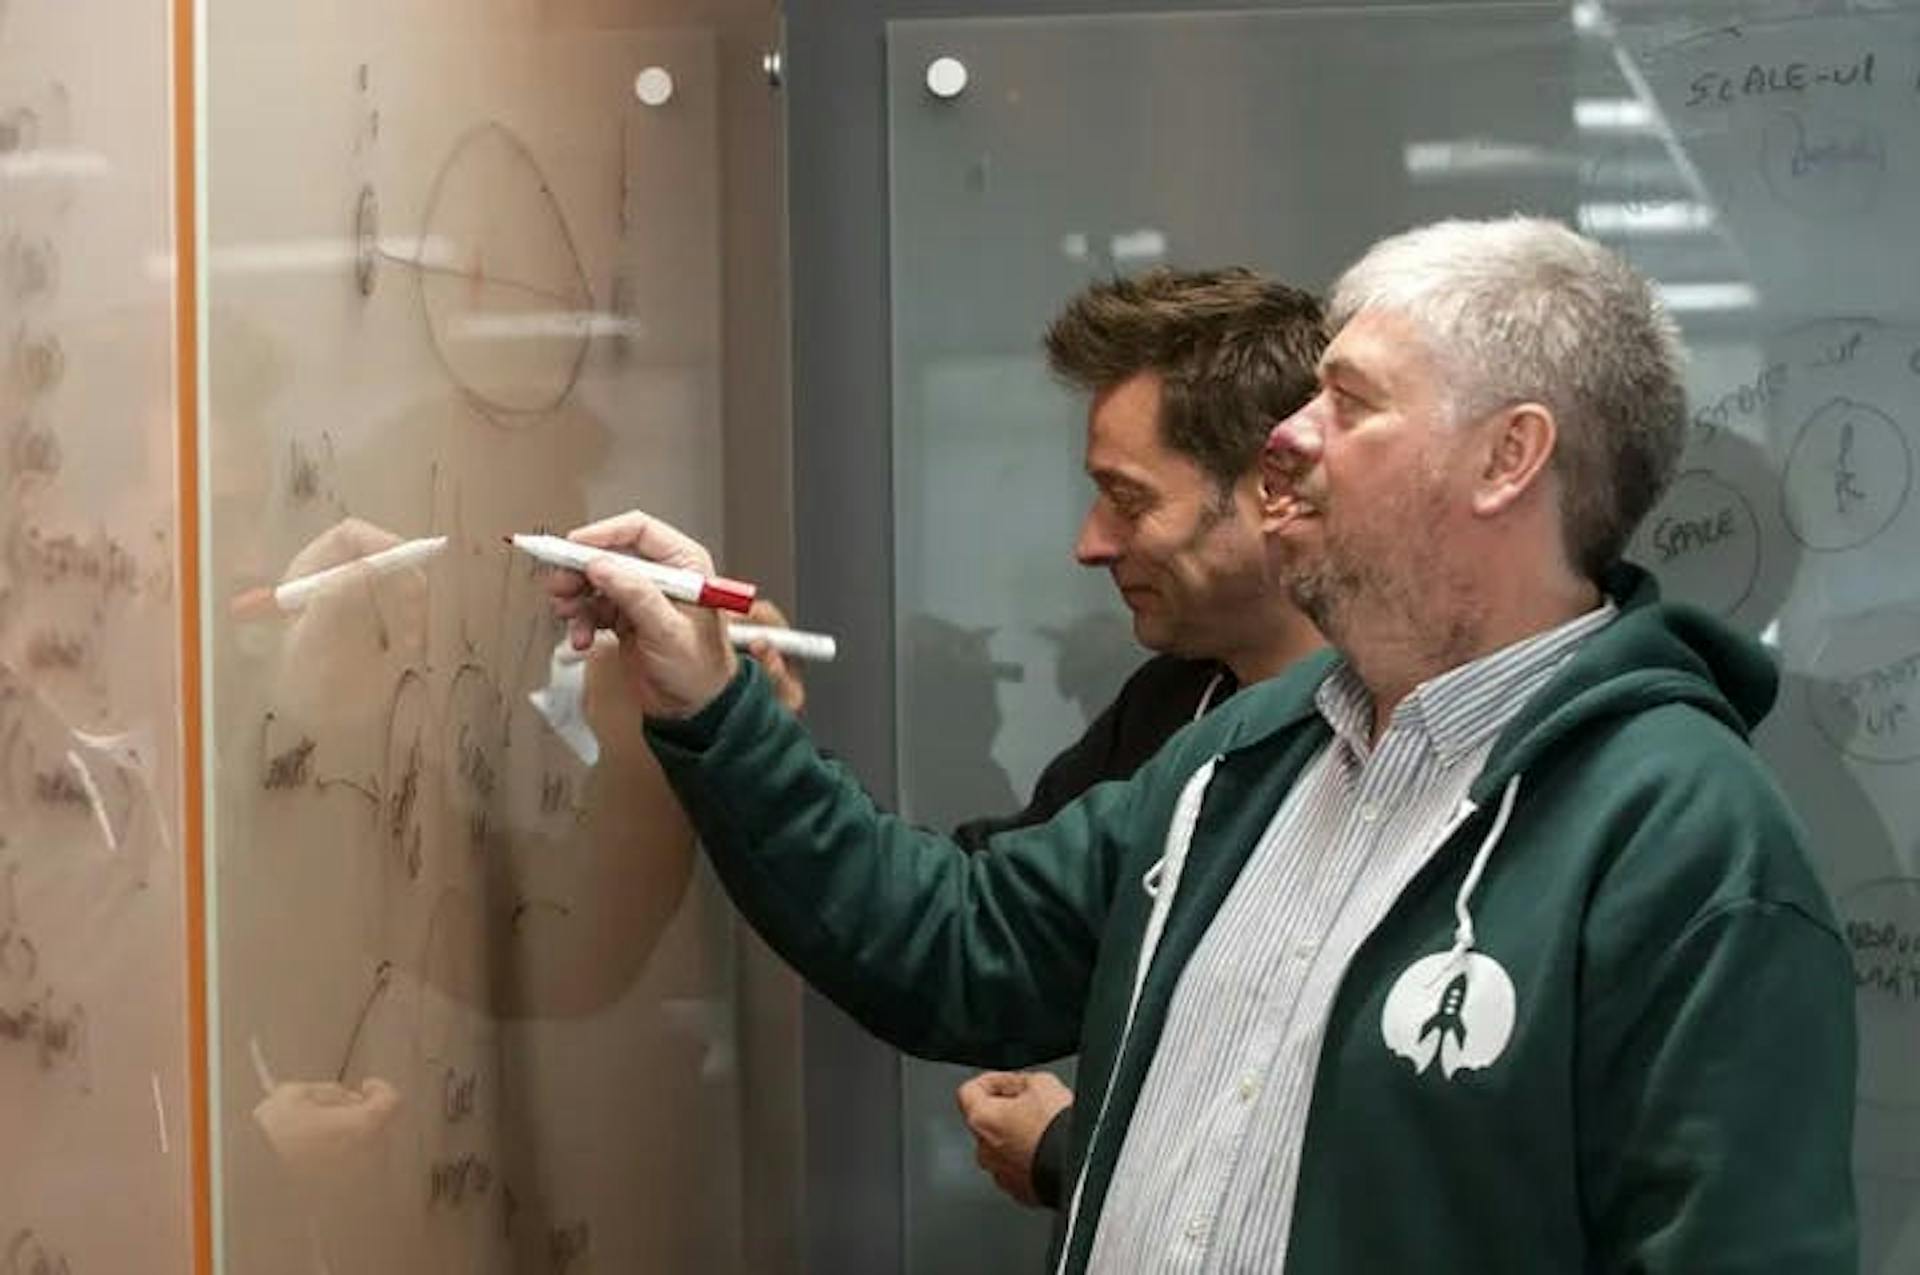 Richard and Keith plan on a whiteboard